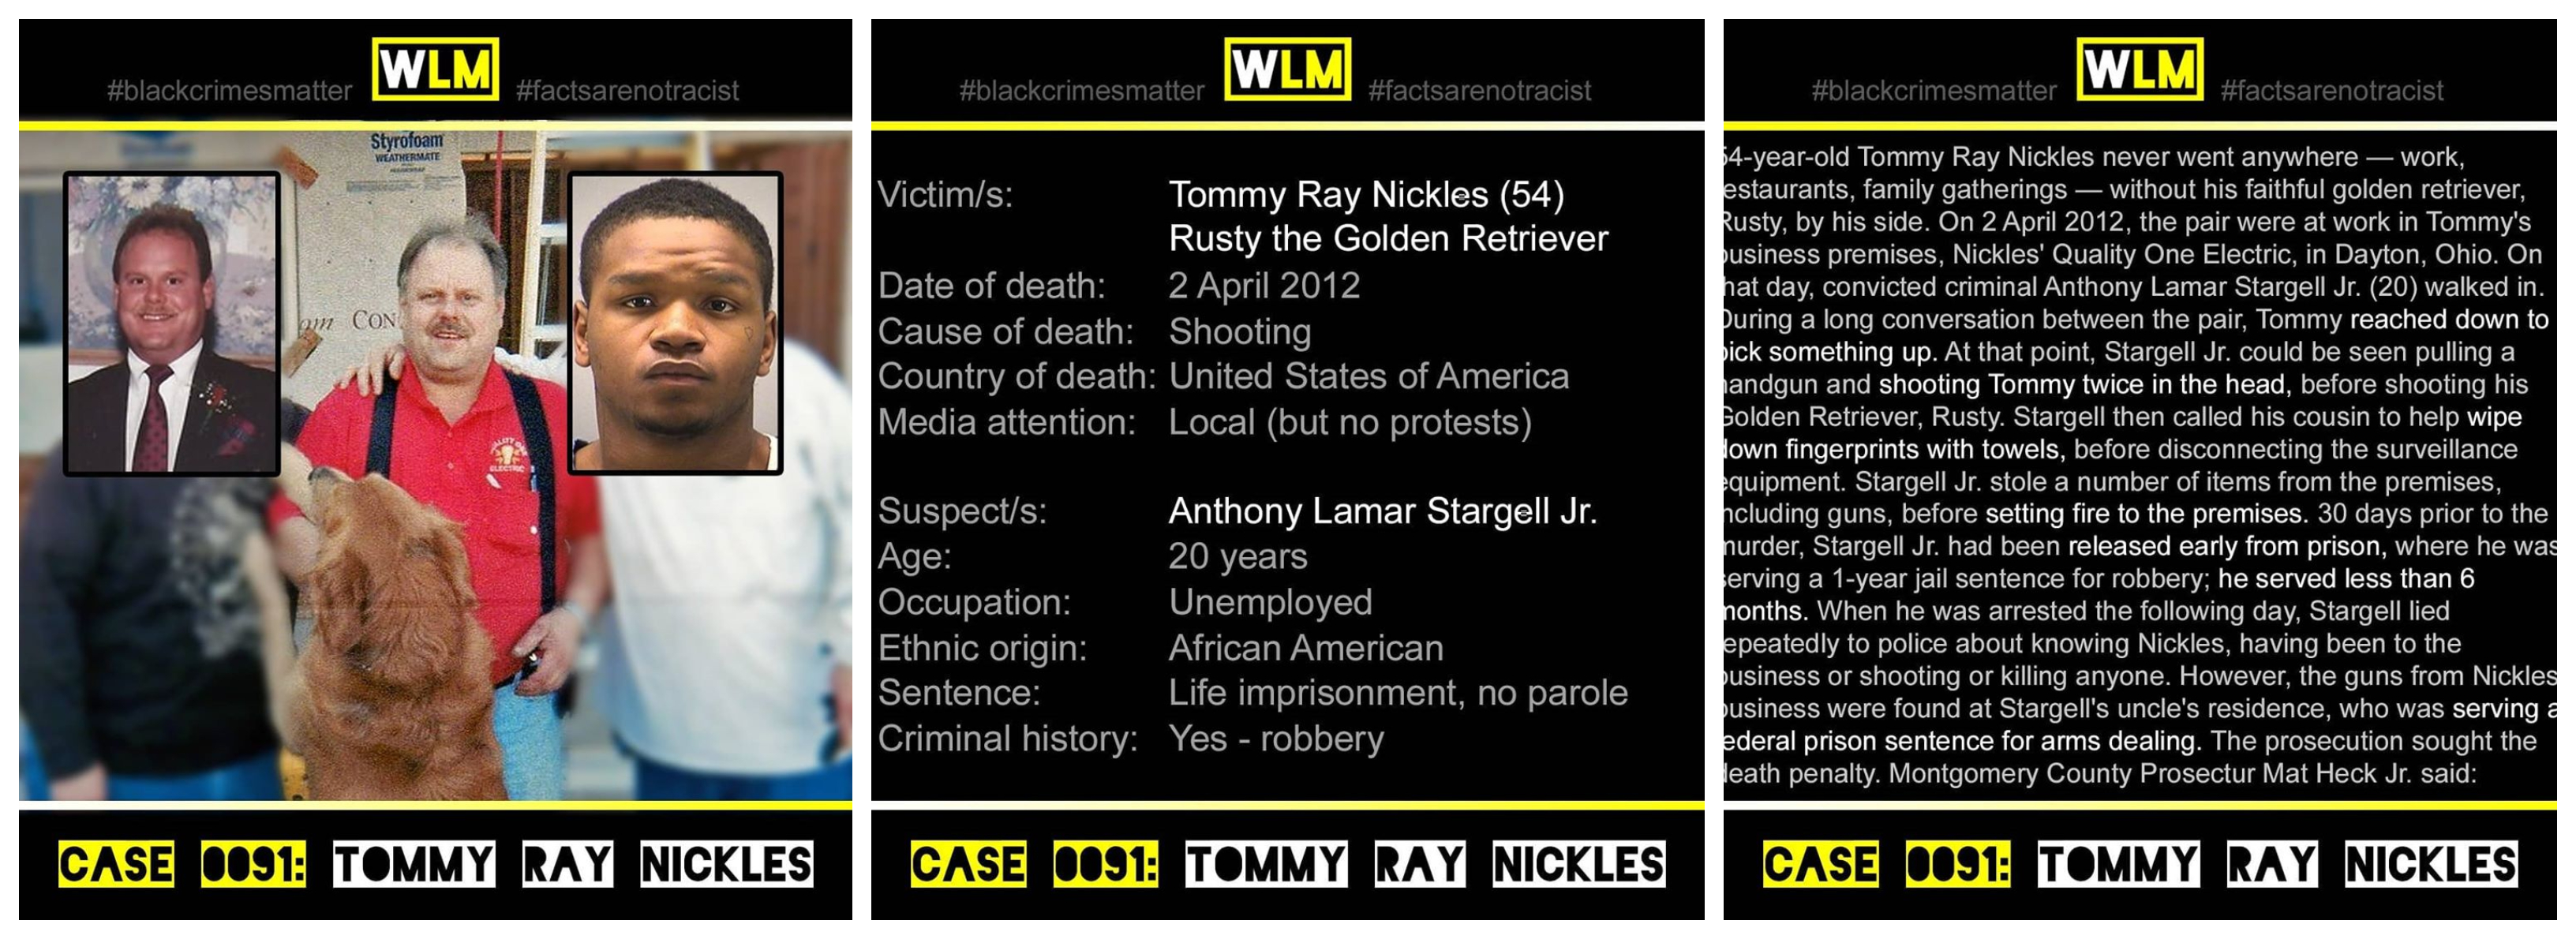 case-091-tommy-ray-nickles